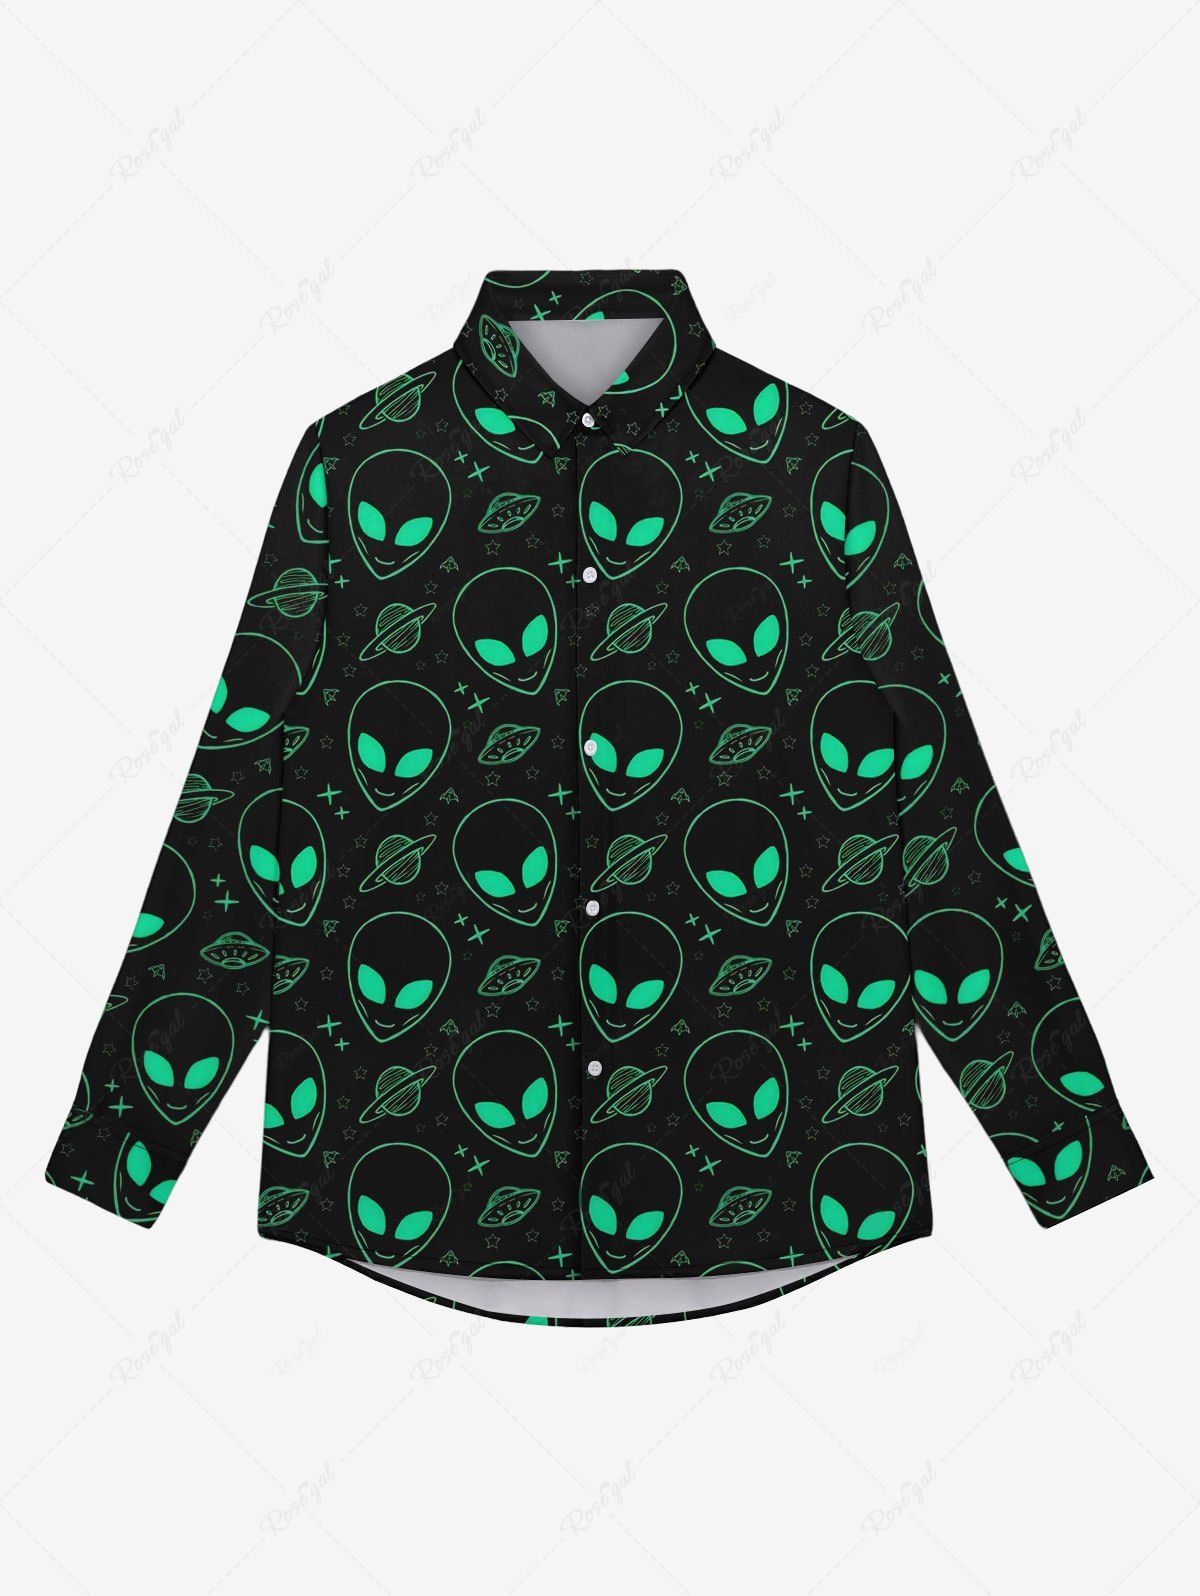 Store Gothic Turn-down Collar Alien UFO Planet Print Buttons Shirt For Men  